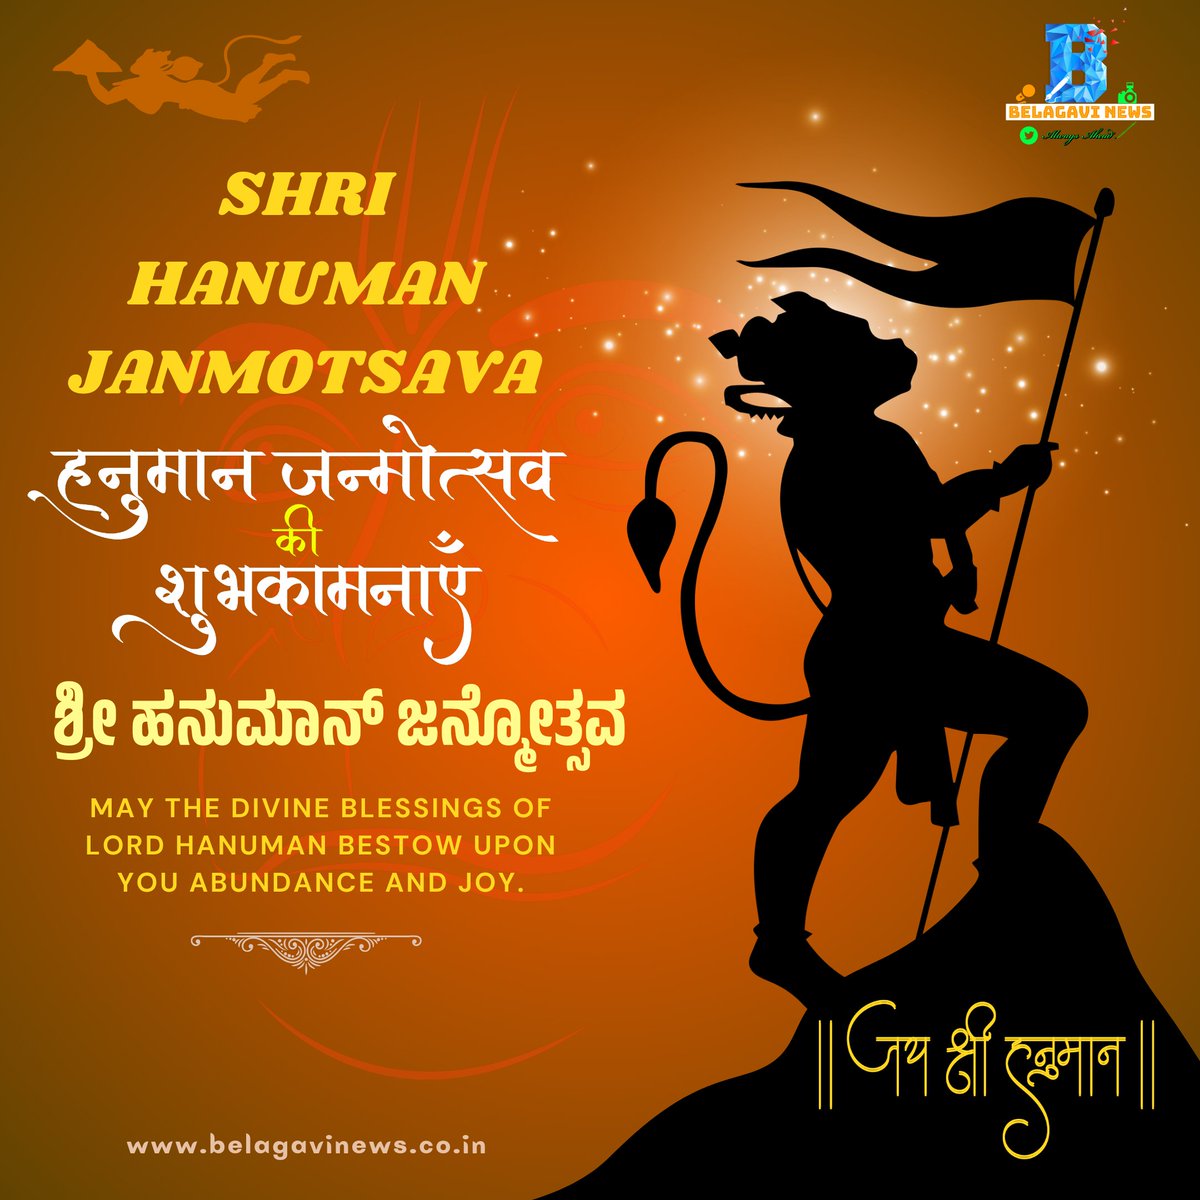 May you be filled with strength and courage, just like the mighty Lord #Hanuman. As you journey through life,may you overcome obstacles with grace and perseverance & may your spirit soar to great heights. May the blessings of Lord Hanuman guide you on your way. #hanumanjanmotsav